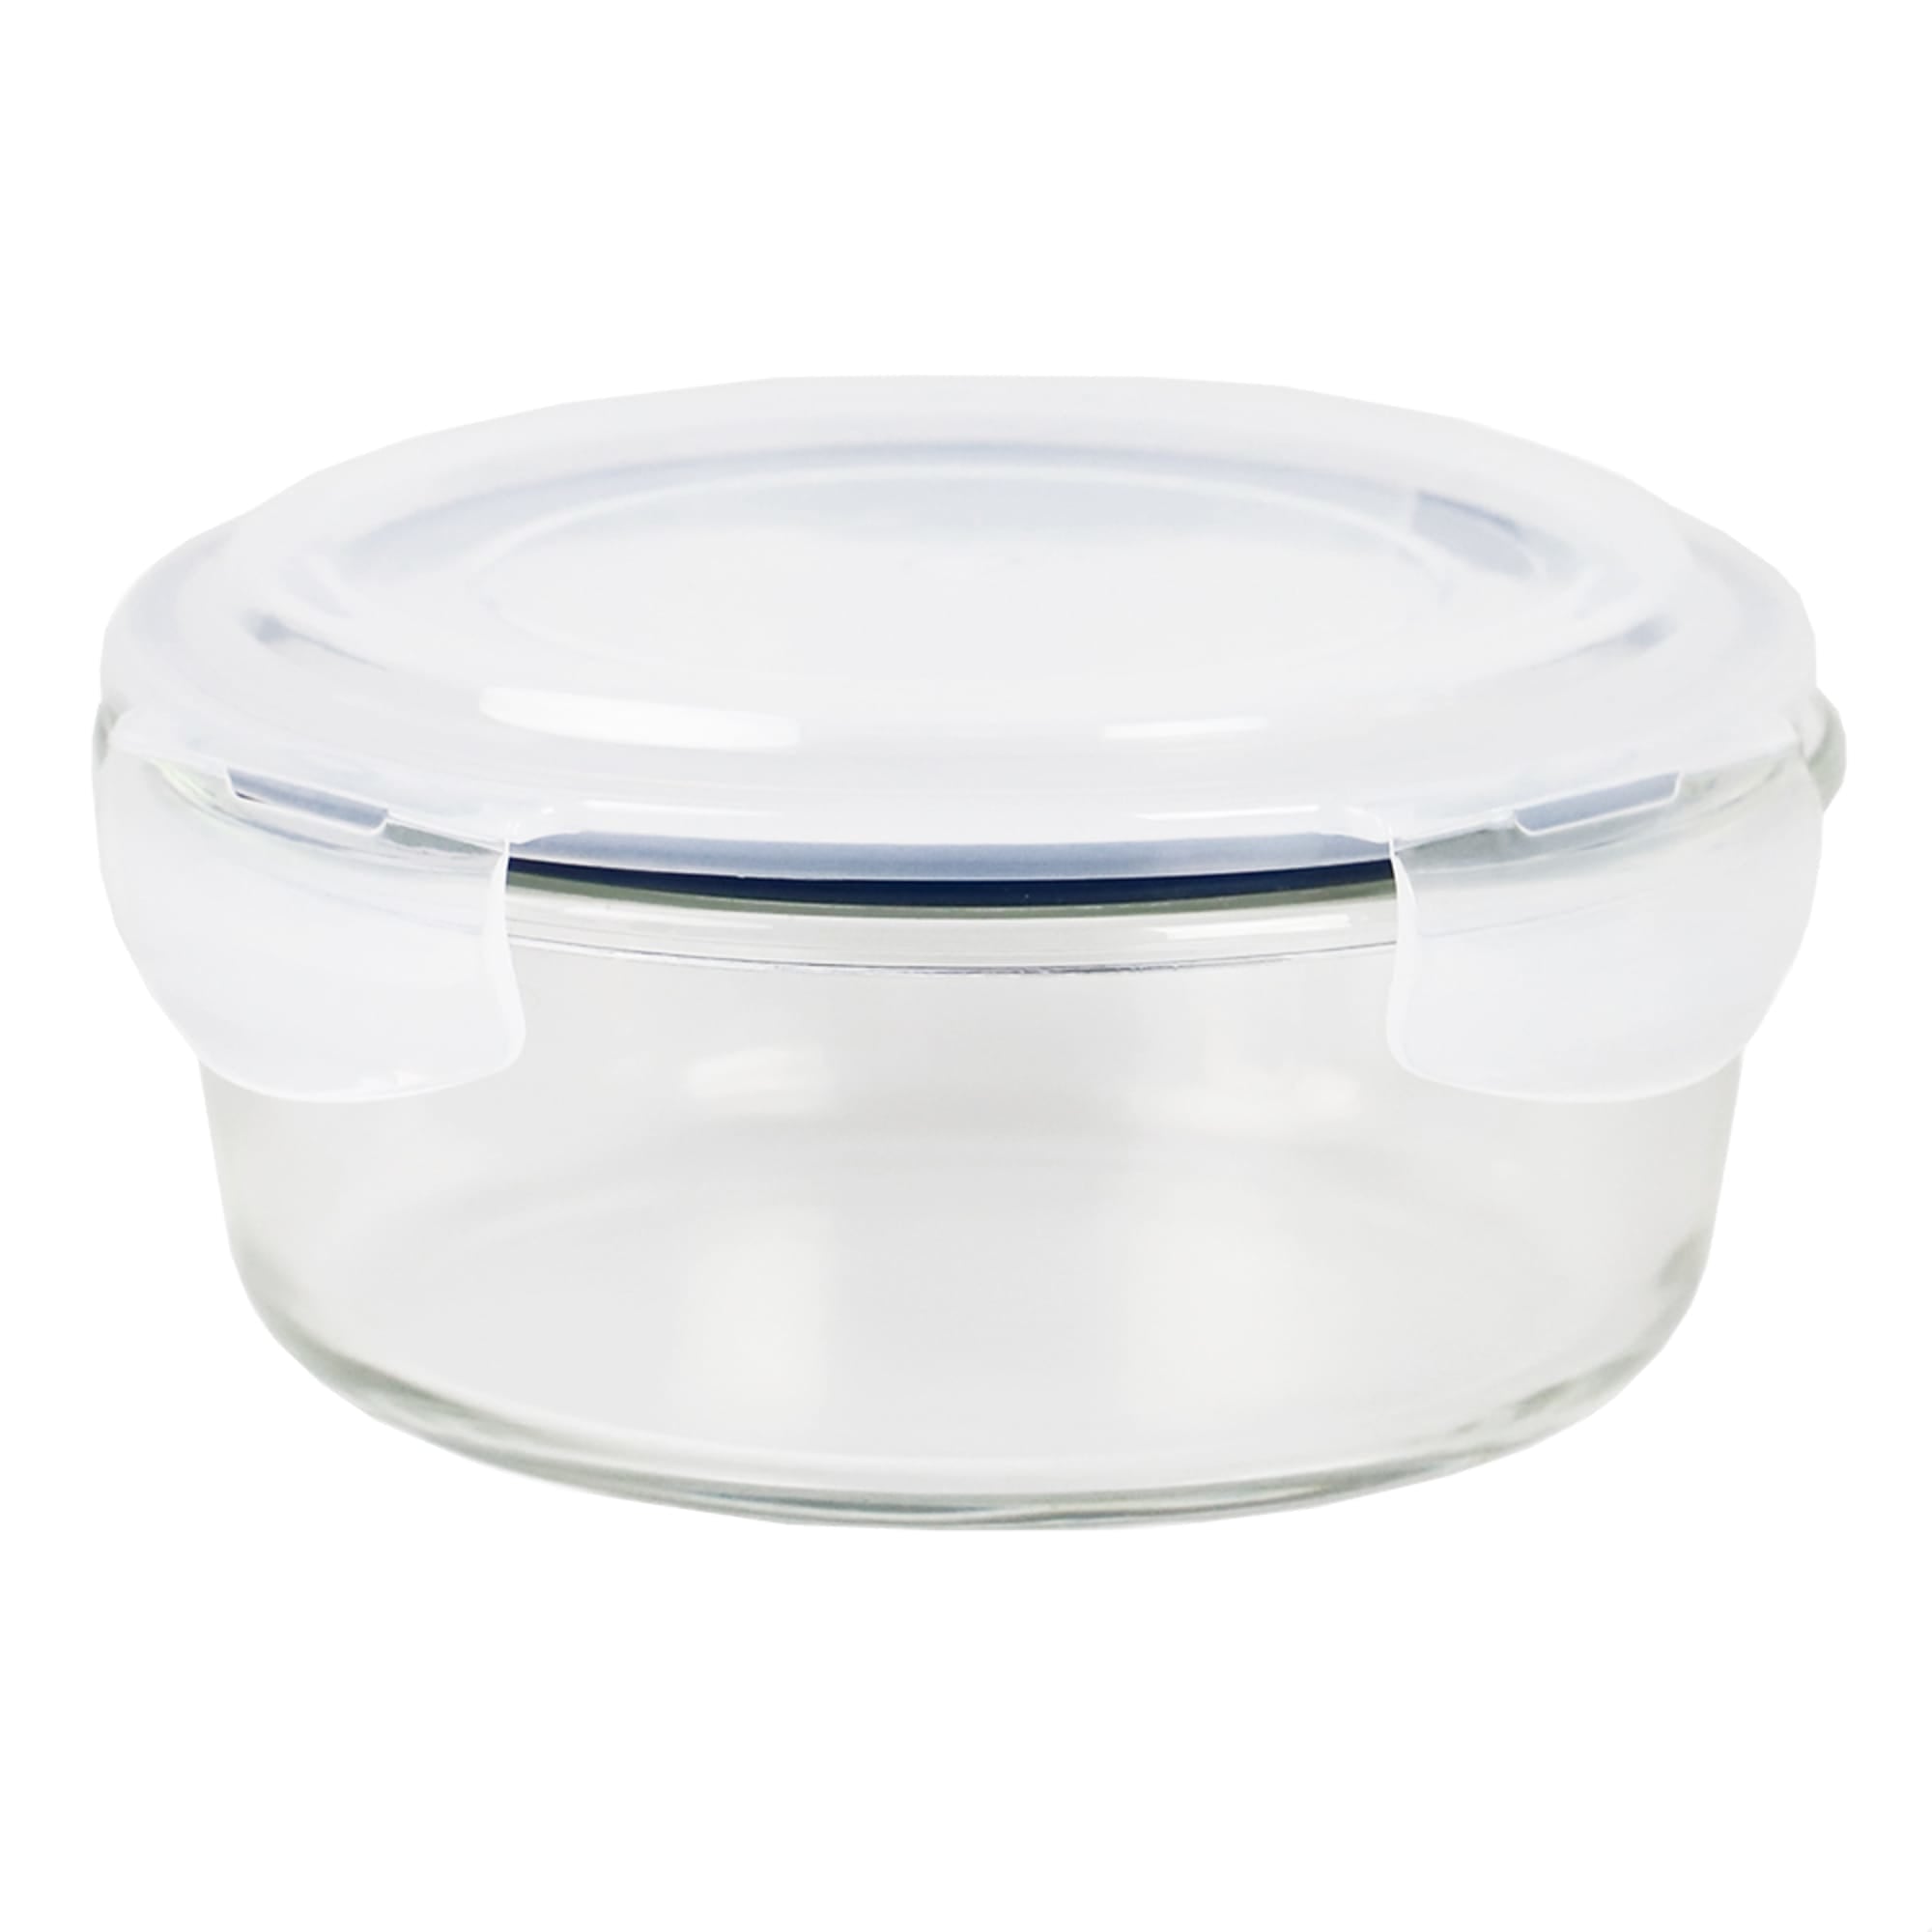 Michael Graves Design 32 Ounce High Borosilicate Glass Round Food Storage Container with Indigo Rubber Seal $5.00 EACH, CASE PACK OF 12